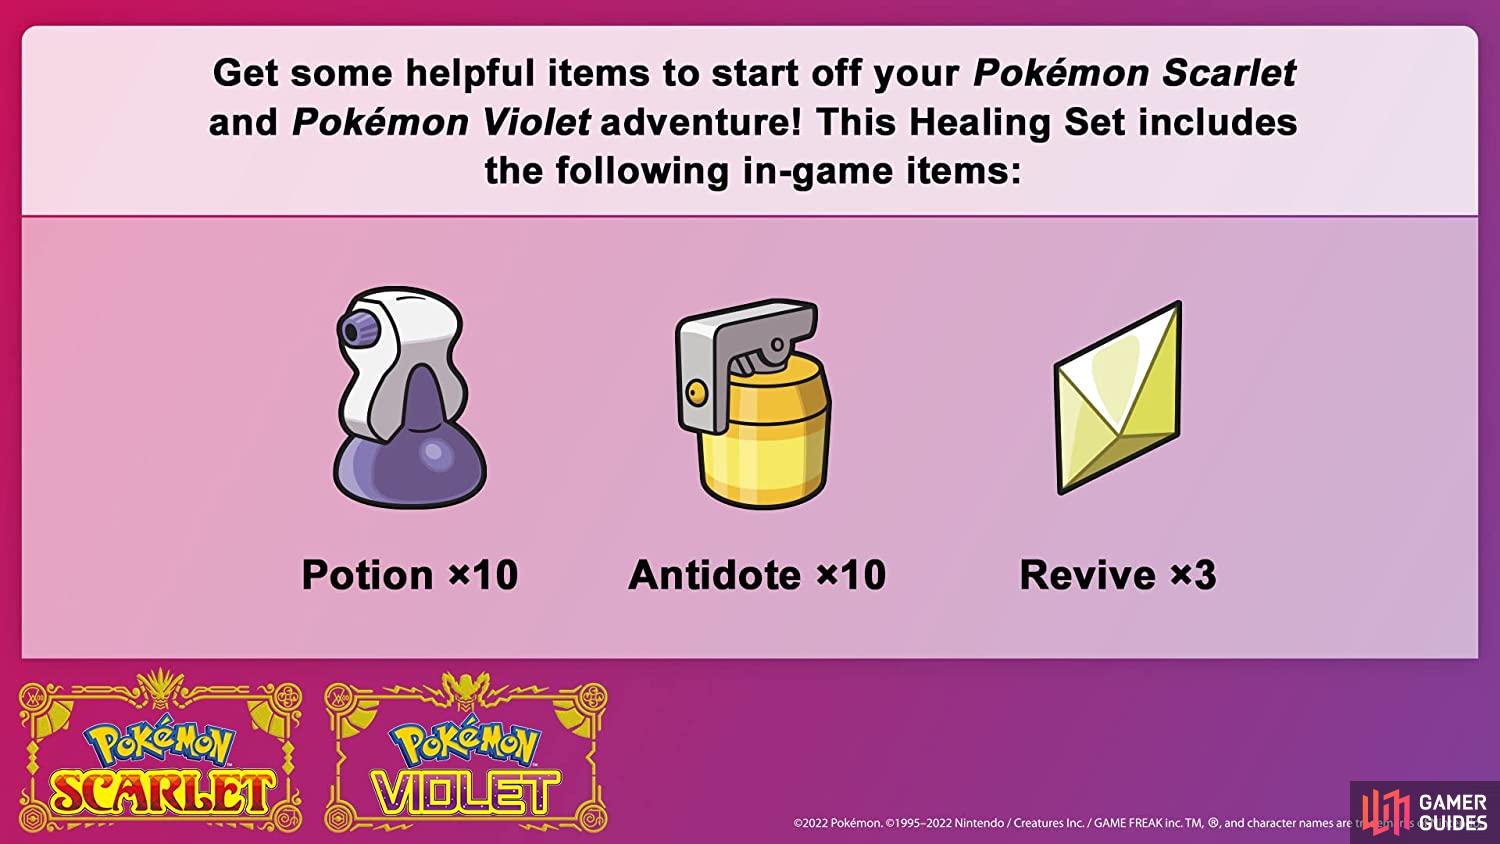 How to check EVs in Pokémon Scarlet and Violet, answered - Dot Esports